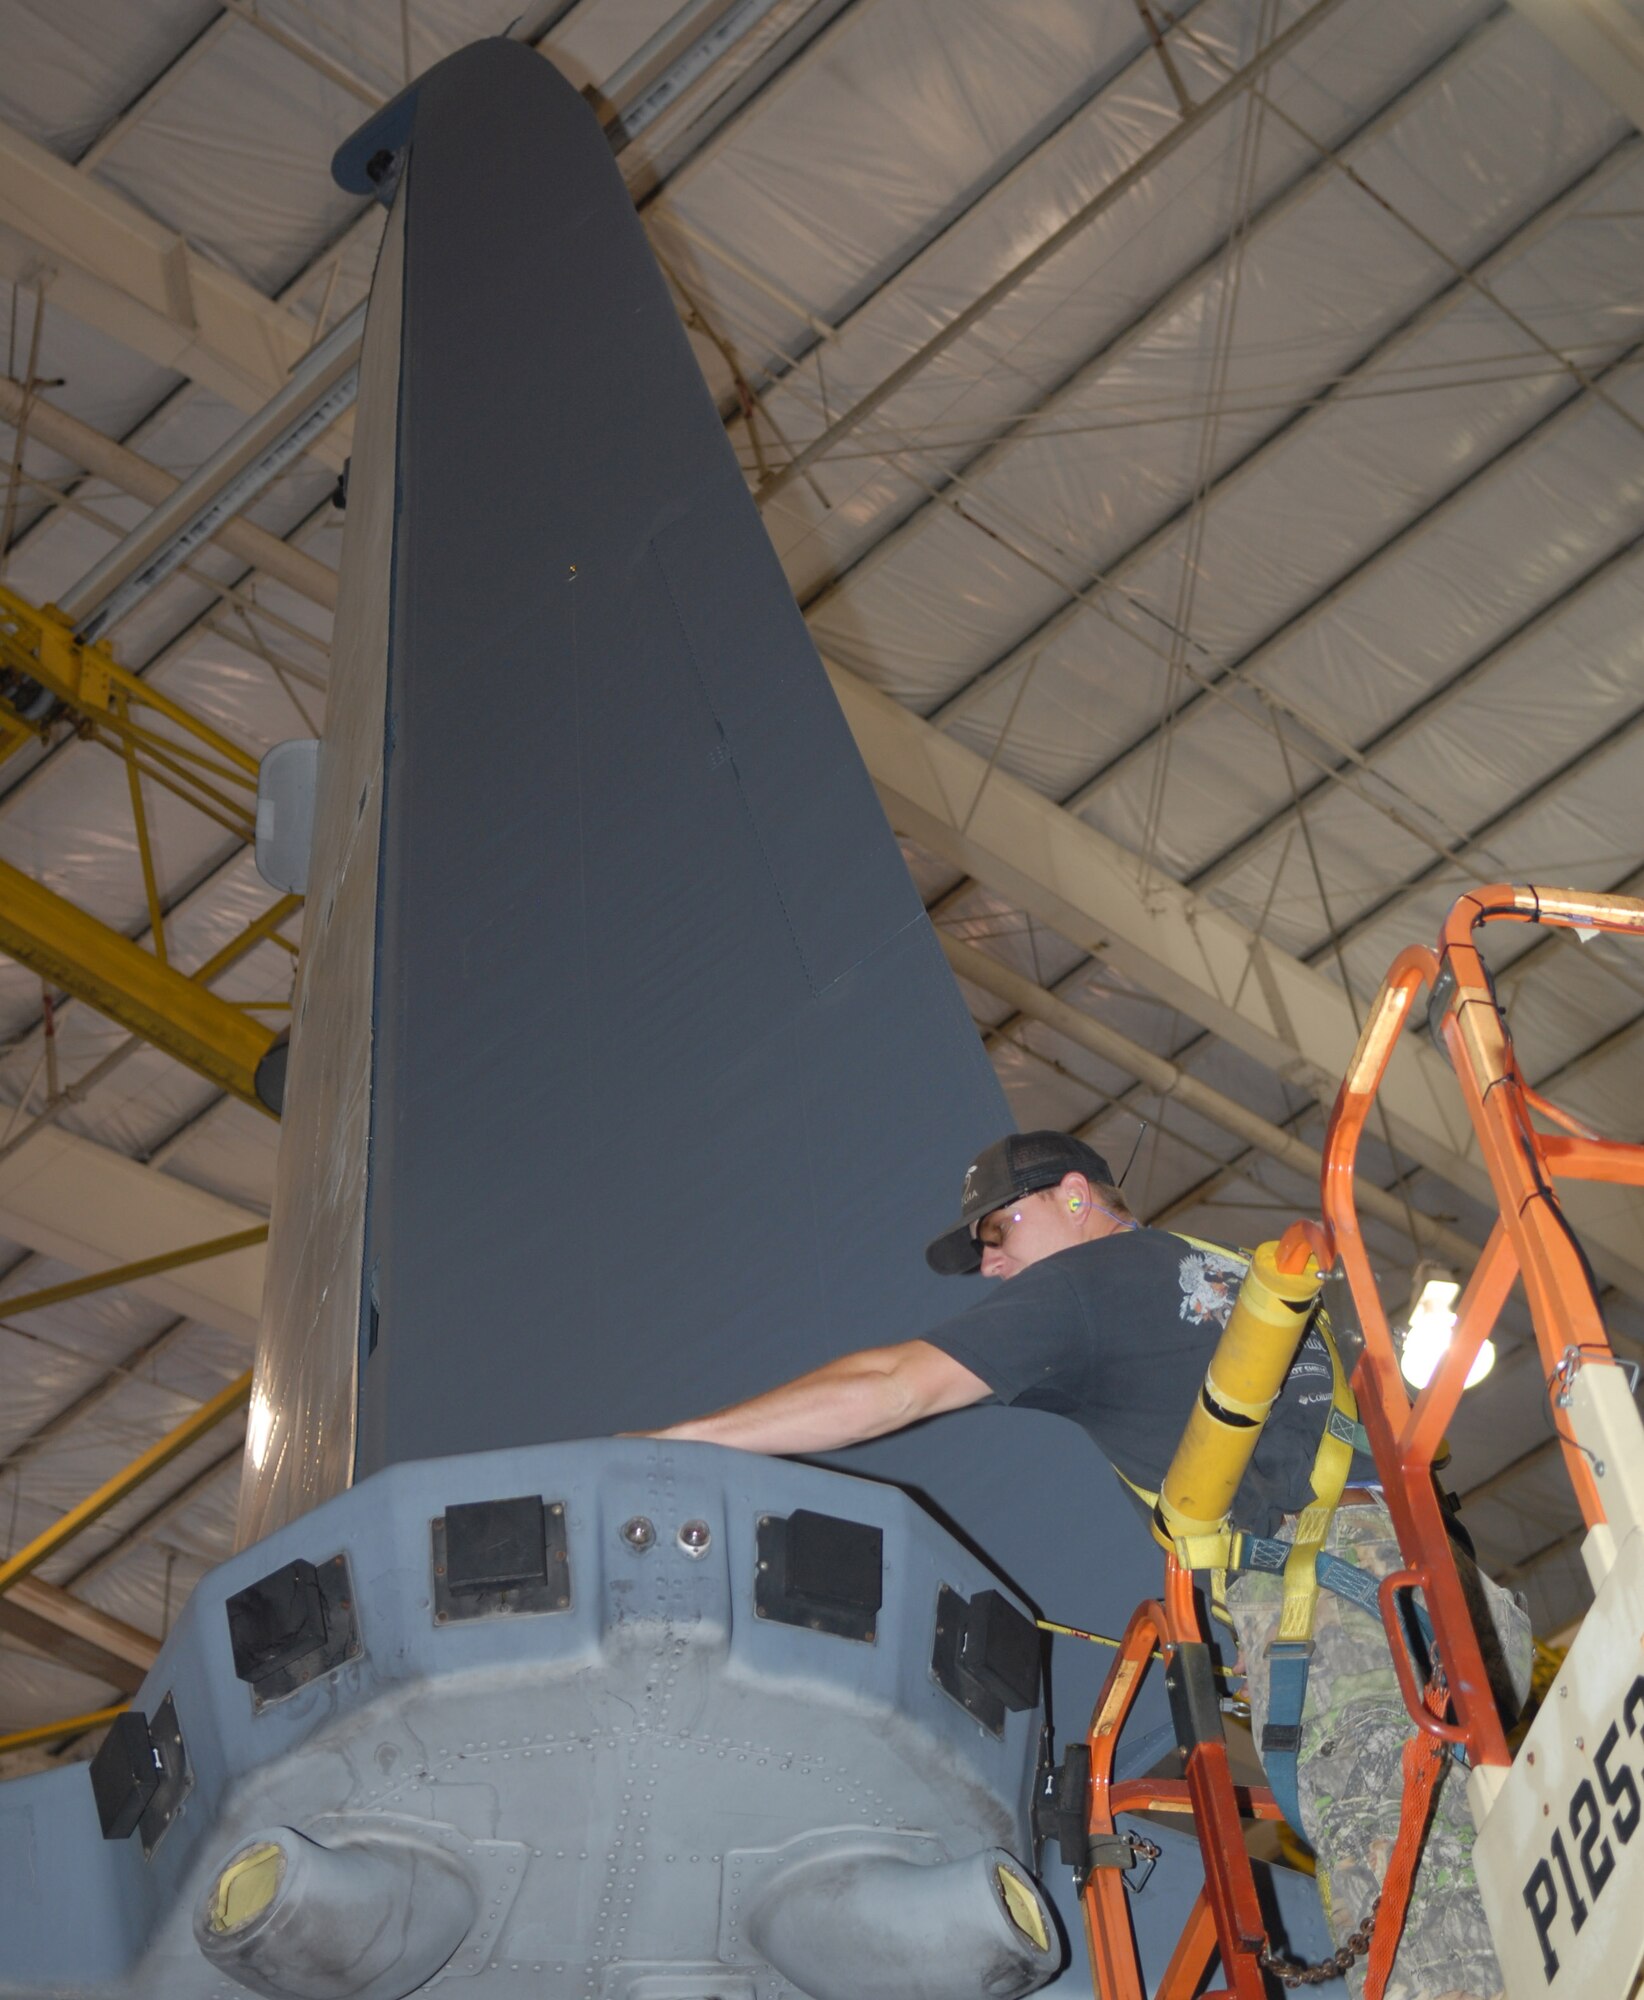 Patrick Petroski, 560th Aircraft Maintenance Squadron, conducts an operational check on the travel rudder of an AC-130.  (U.S. Air Force photo by Misuzu Allen)